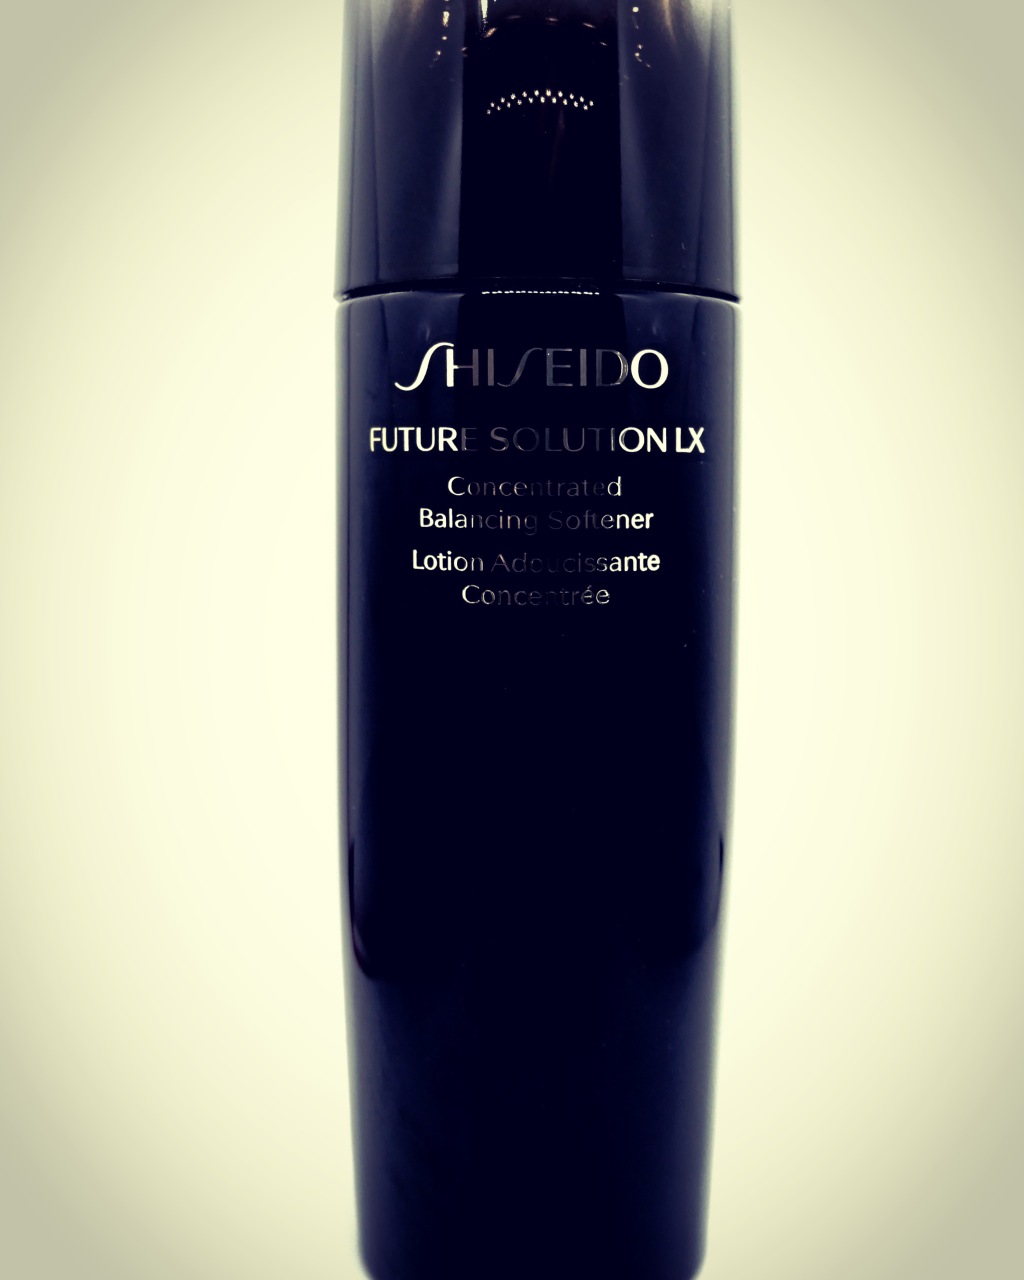 Shiseido Future Solution LX Concentrated Balancing Softener – Review